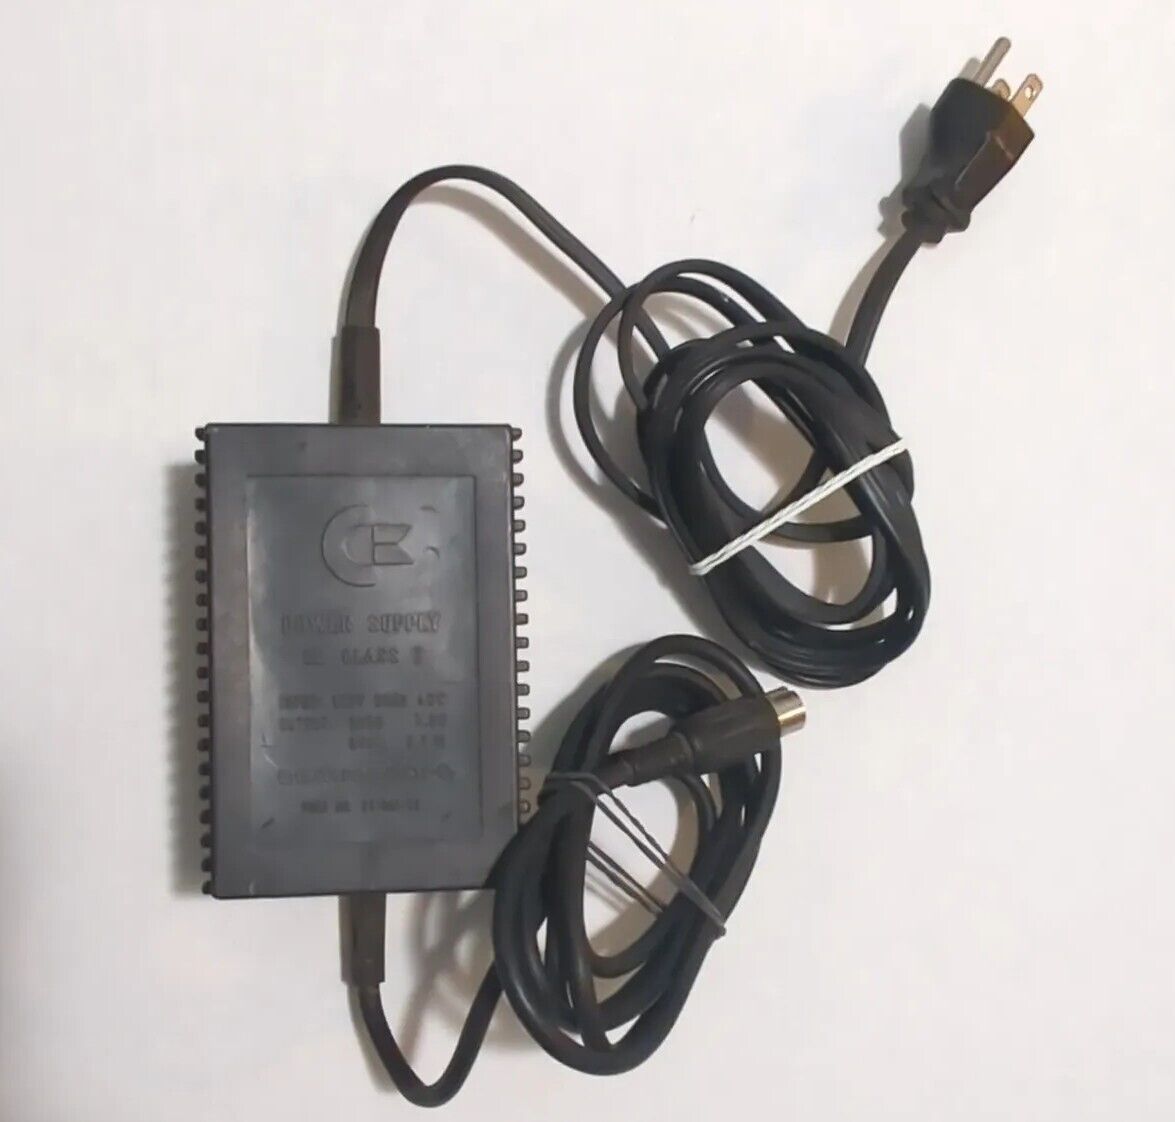 Official Genuine OEM Vintage 251052-02 Commodore C64 Computer 4-Pin Power Supply